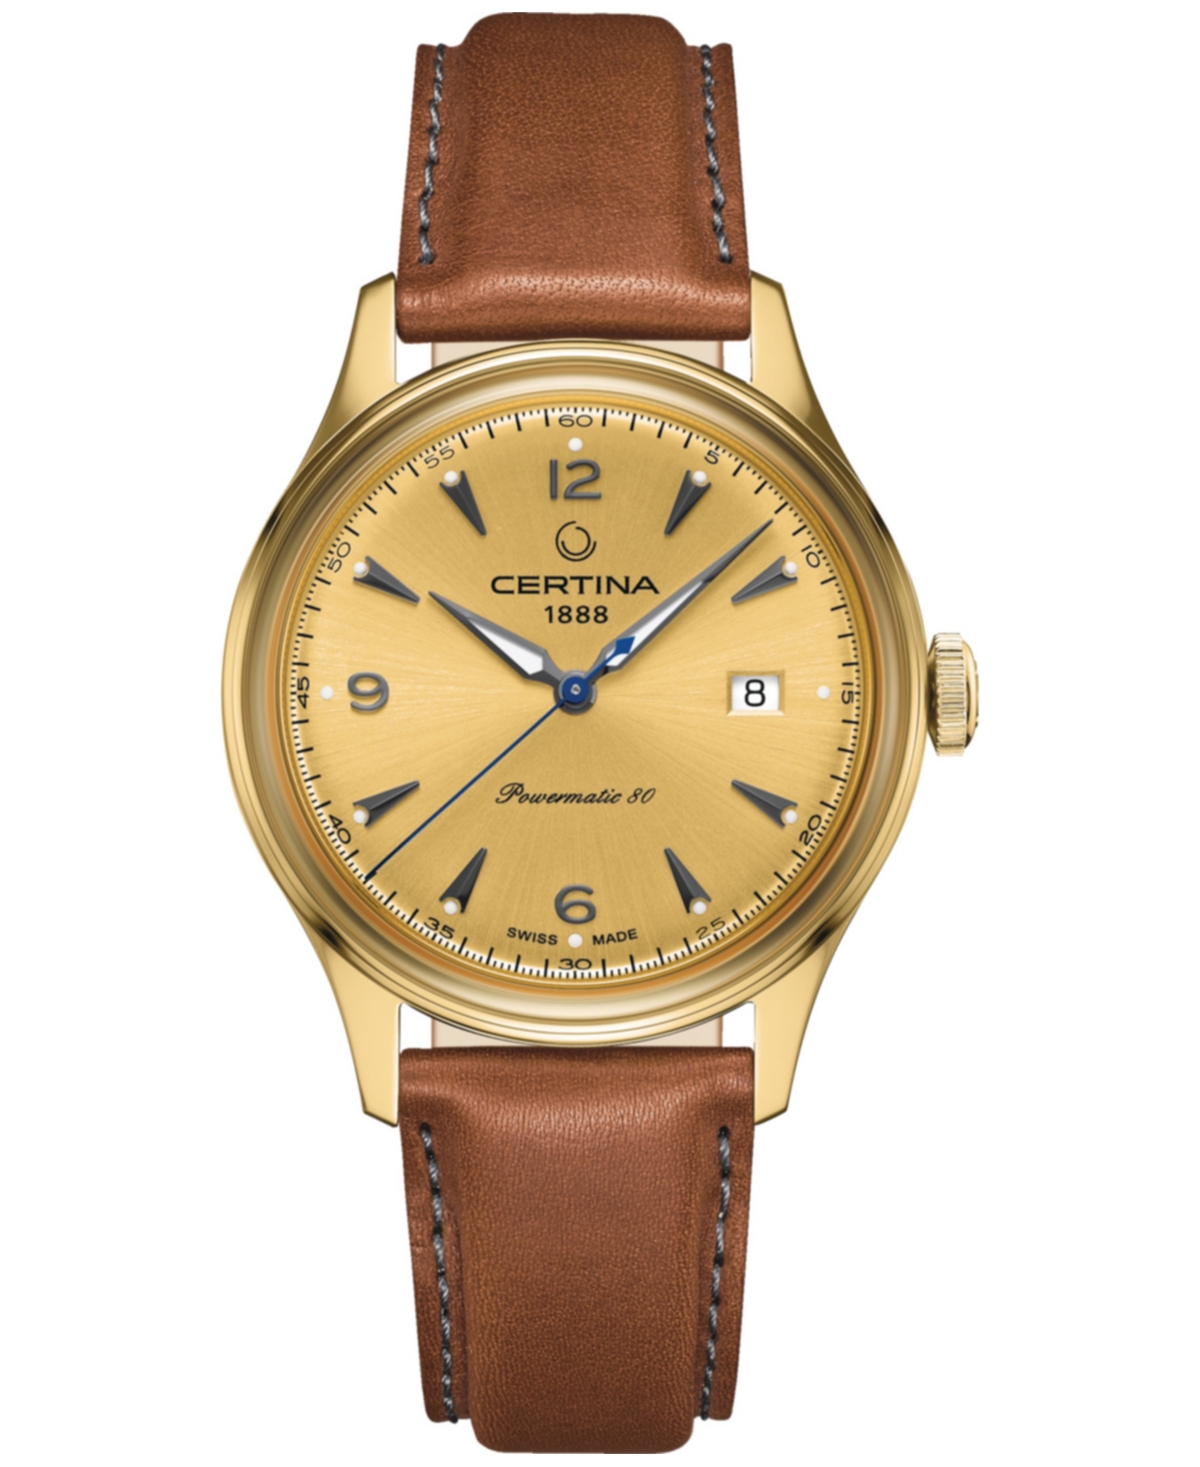 Certina Men's Swiss Automatic Ds Brown Leather Strap Watch 41mm In Champagne,golden